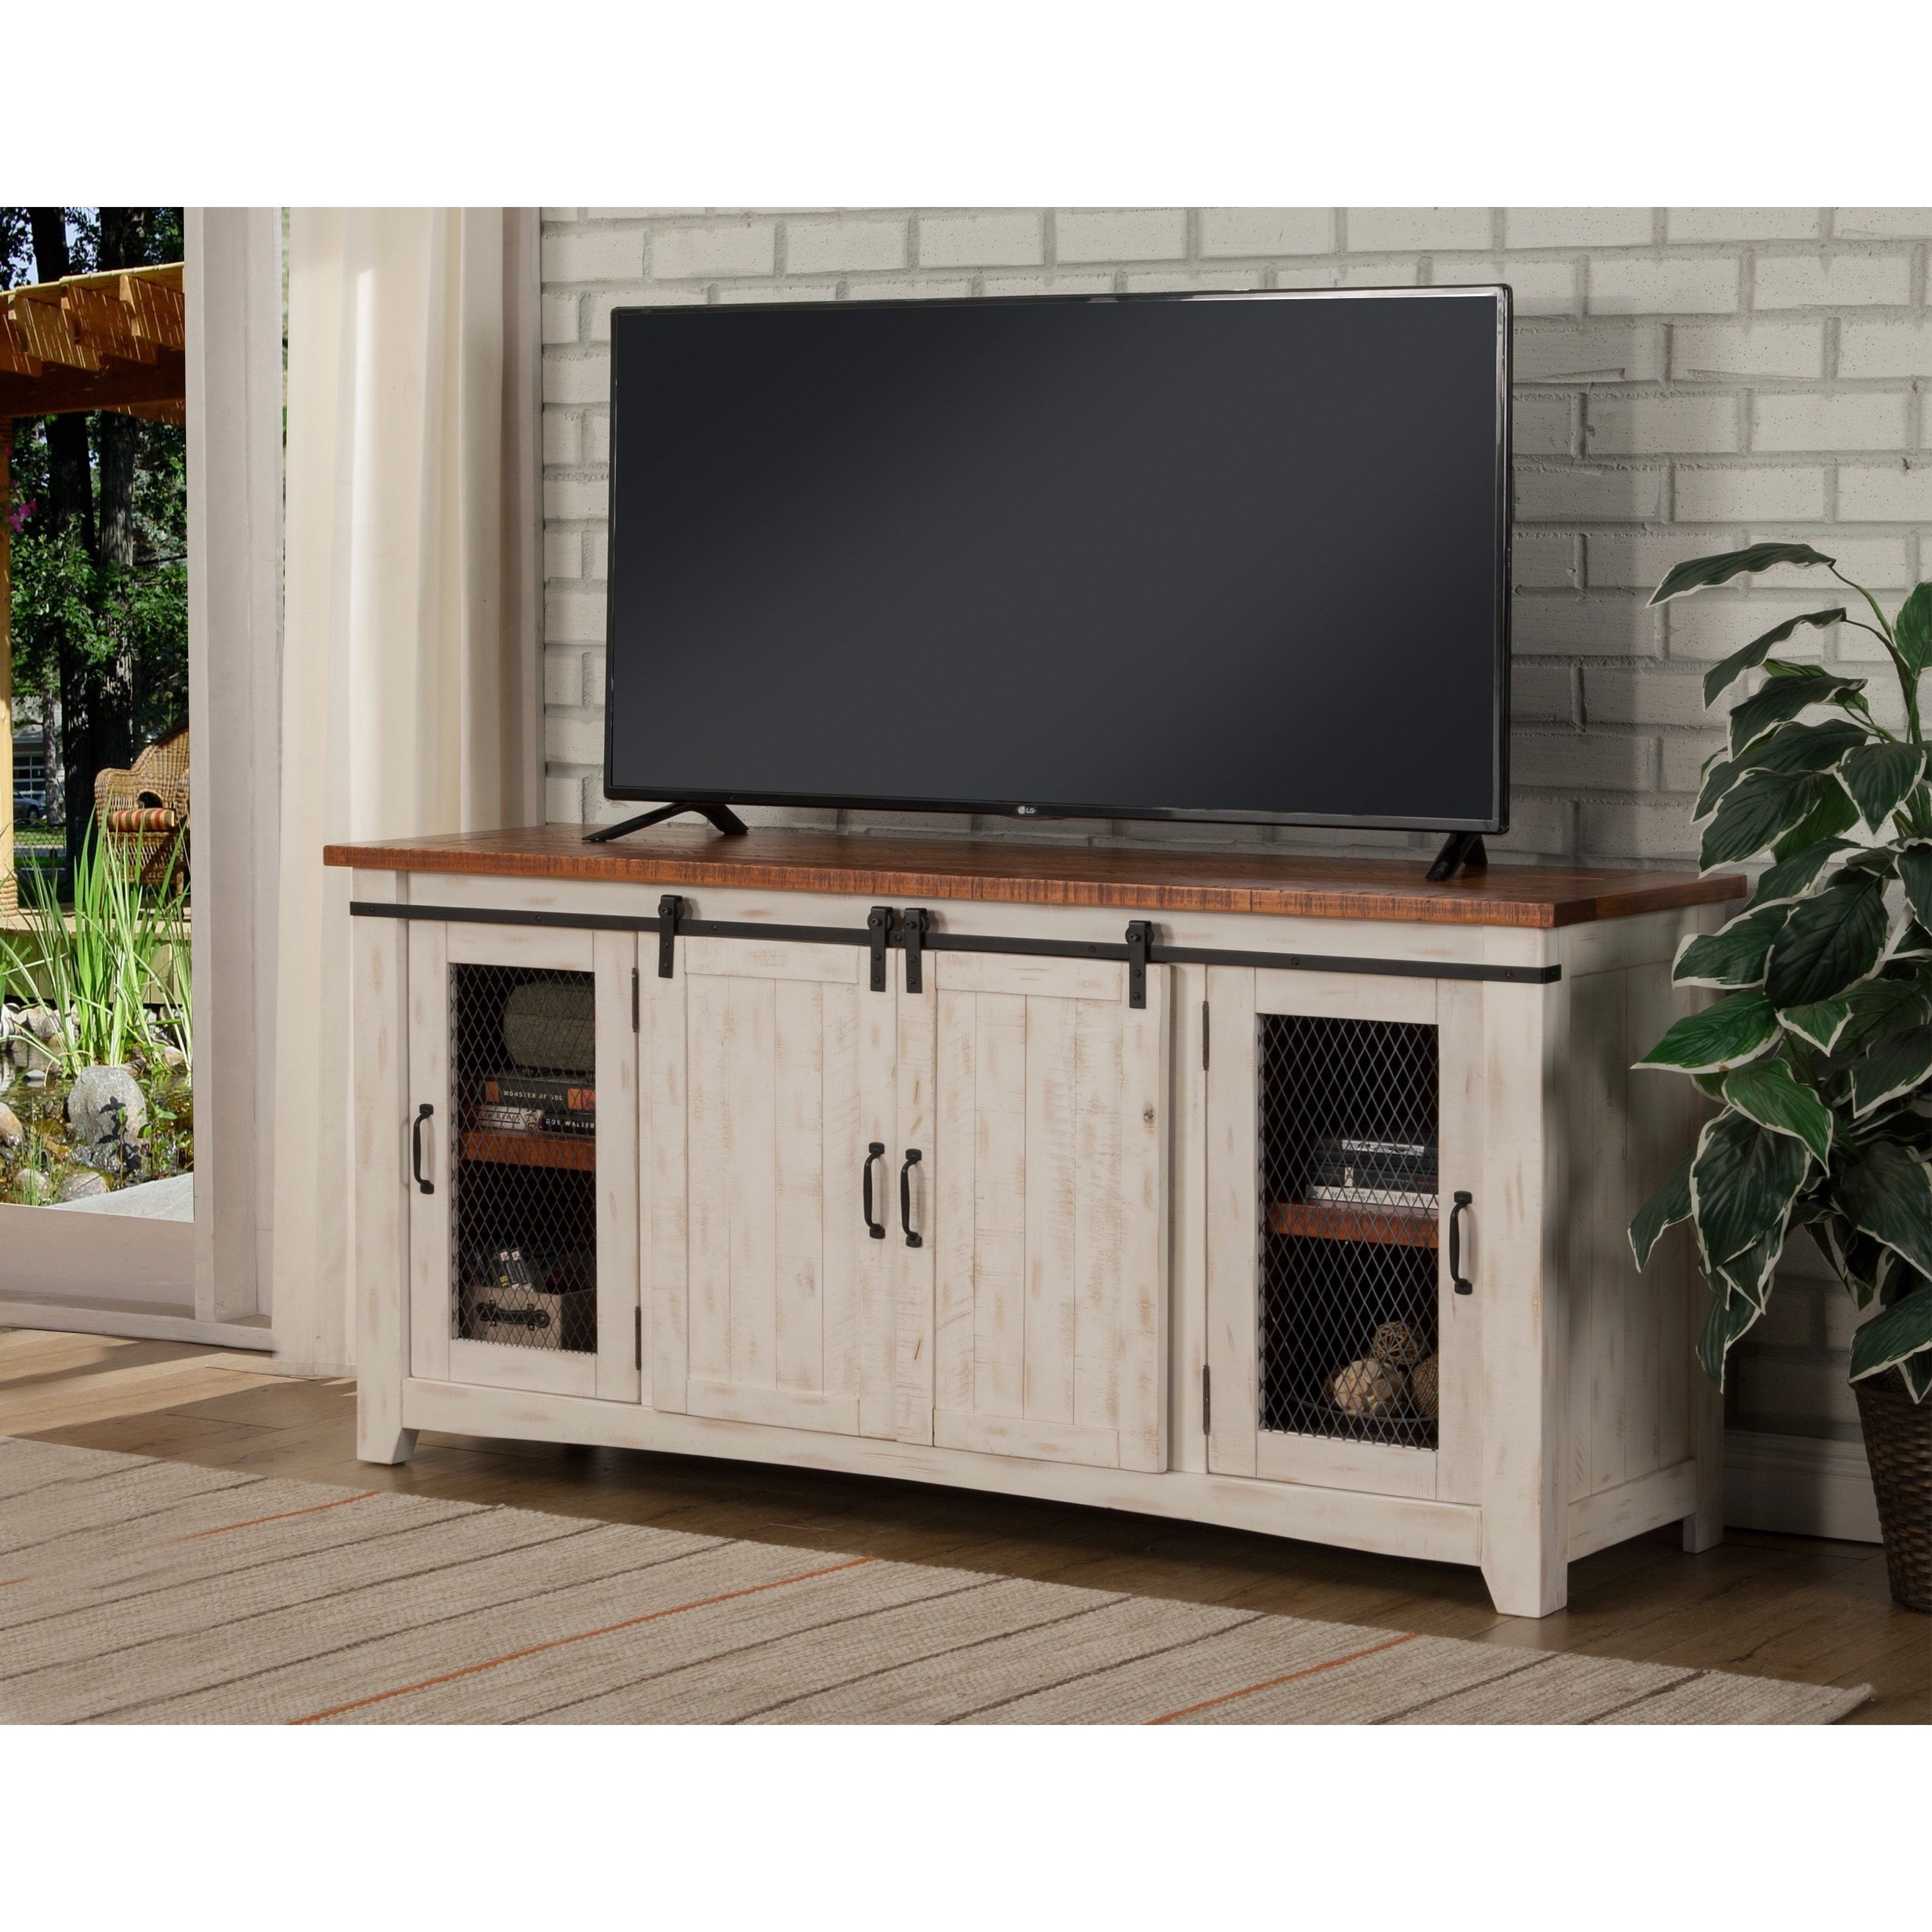 Shop Martin Svensson Home Taos 65" Tv Stand – 65 Inches In Width Regarding Laurent 70 Inch Tv Stands (View 5 of 30)